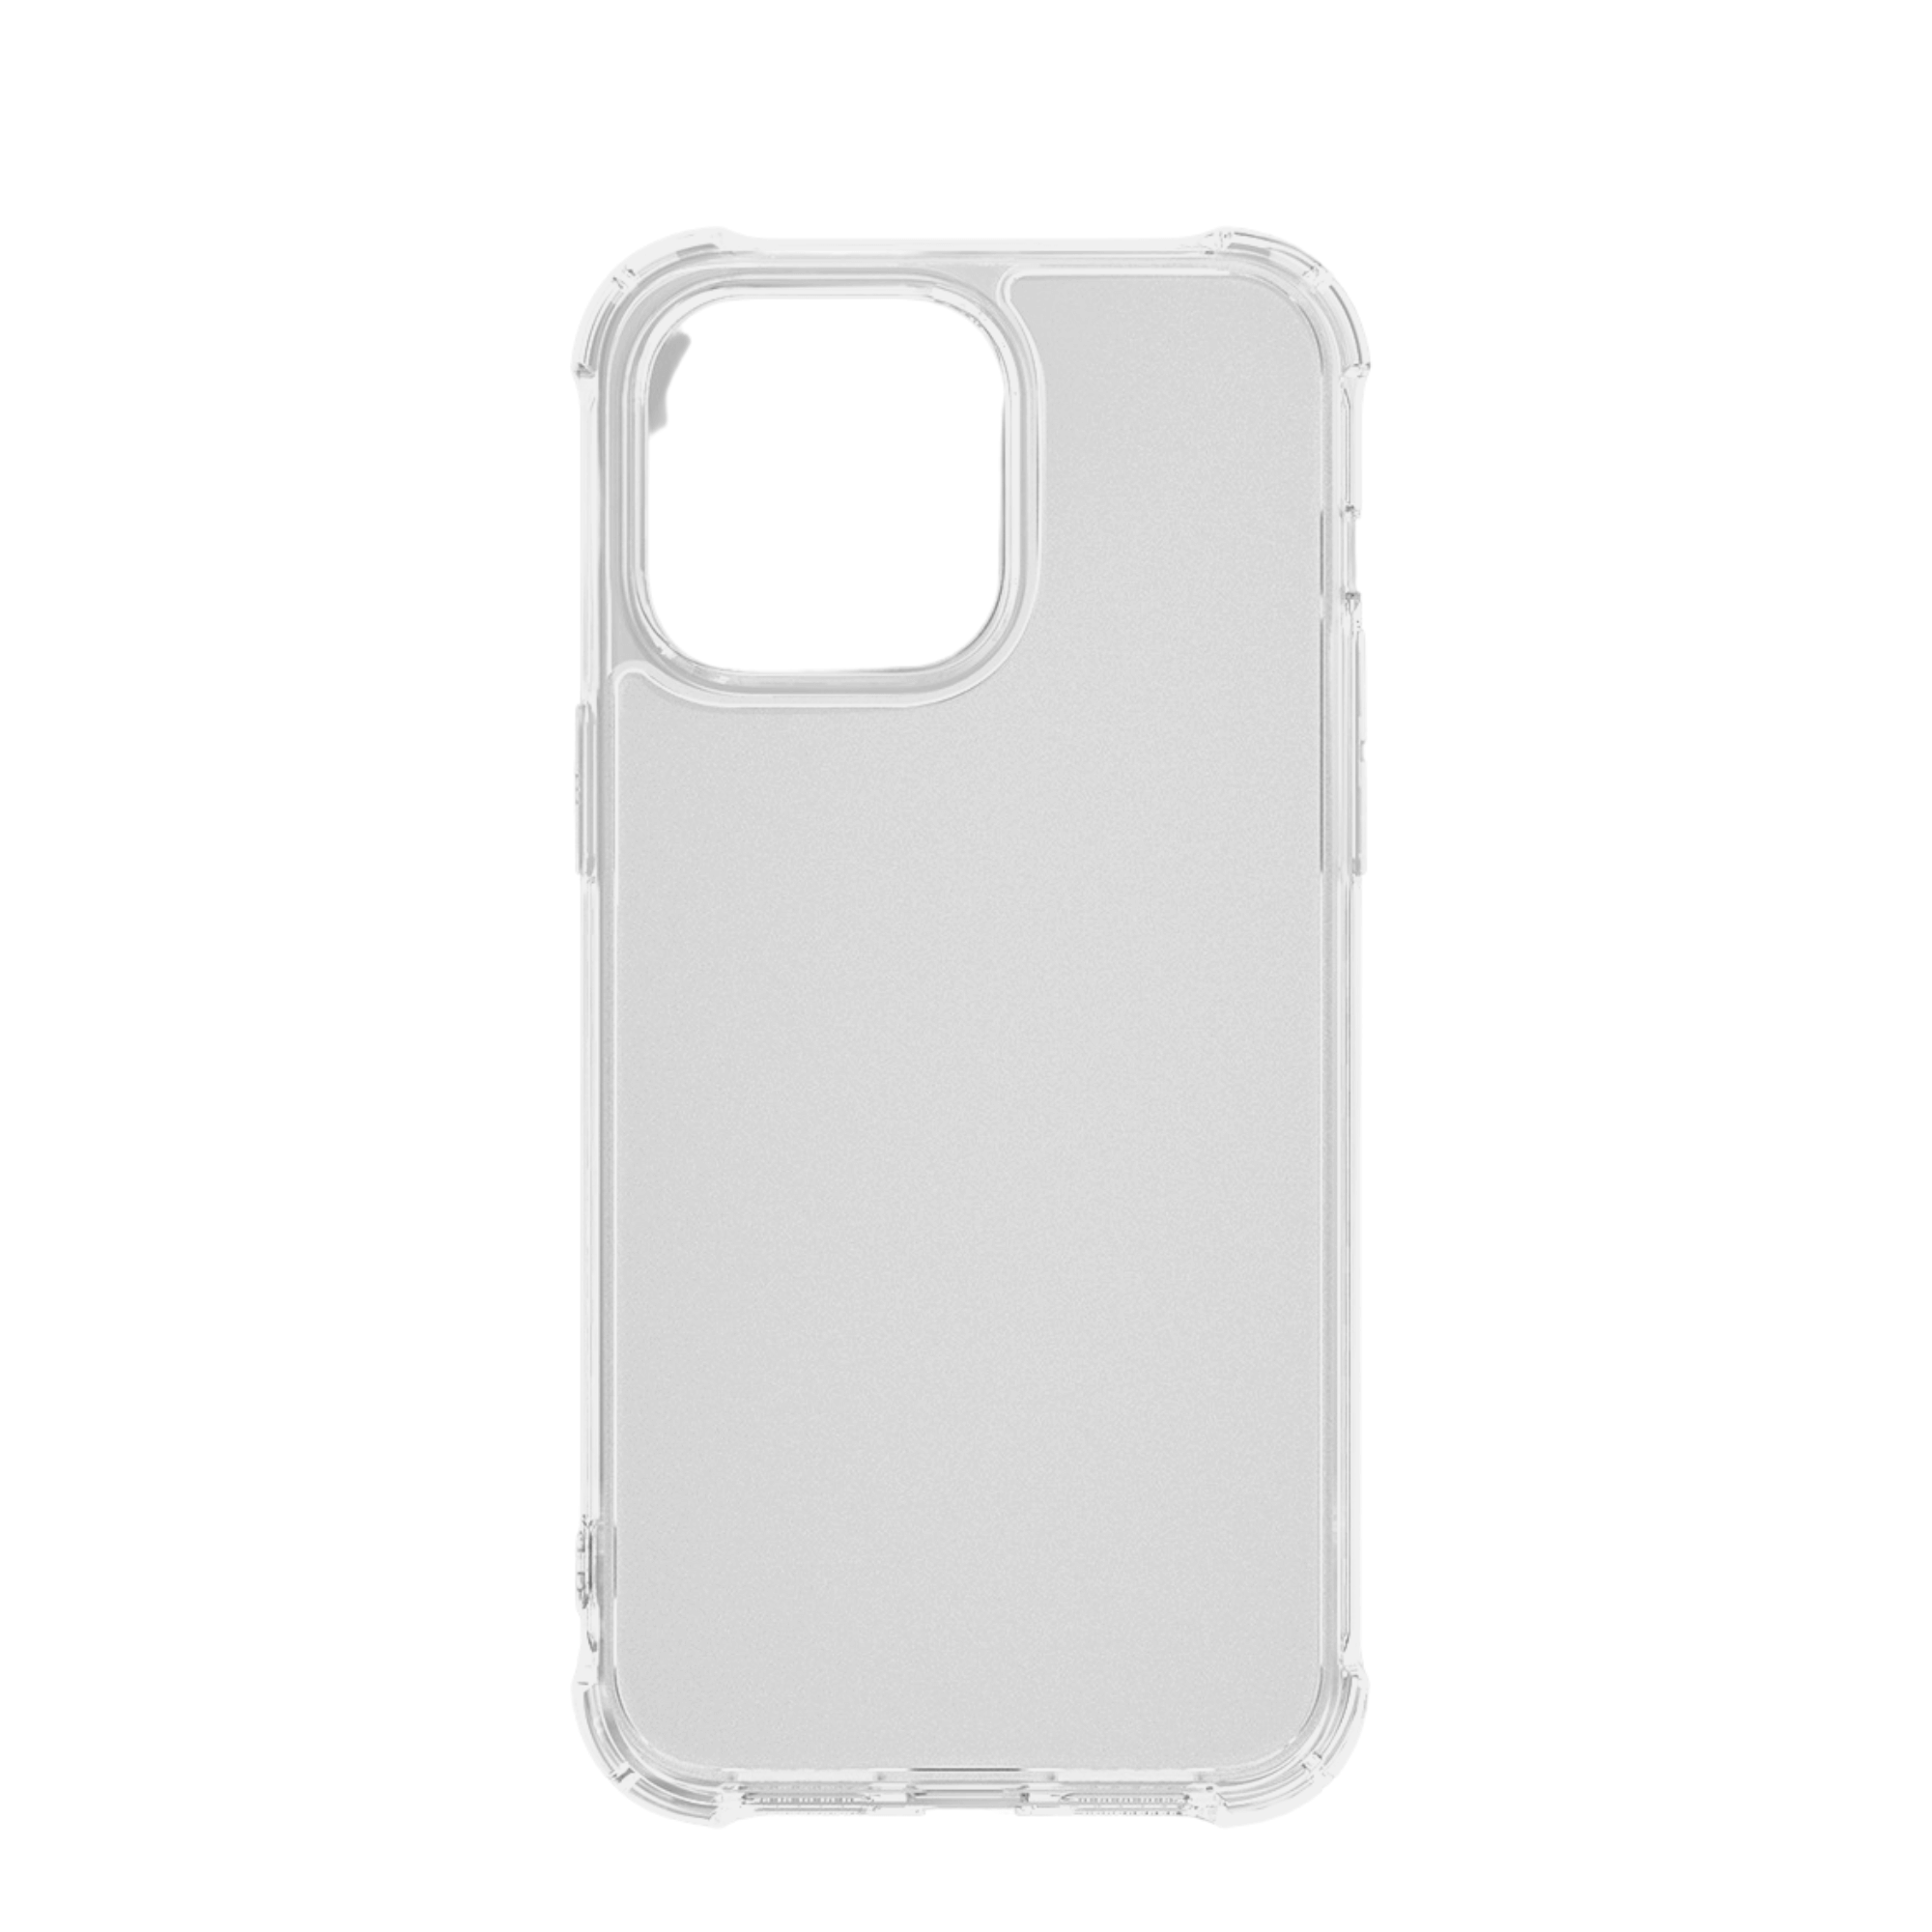 Temepoint M1 Frosted Tempered Matte Coating Glass iPhone Case